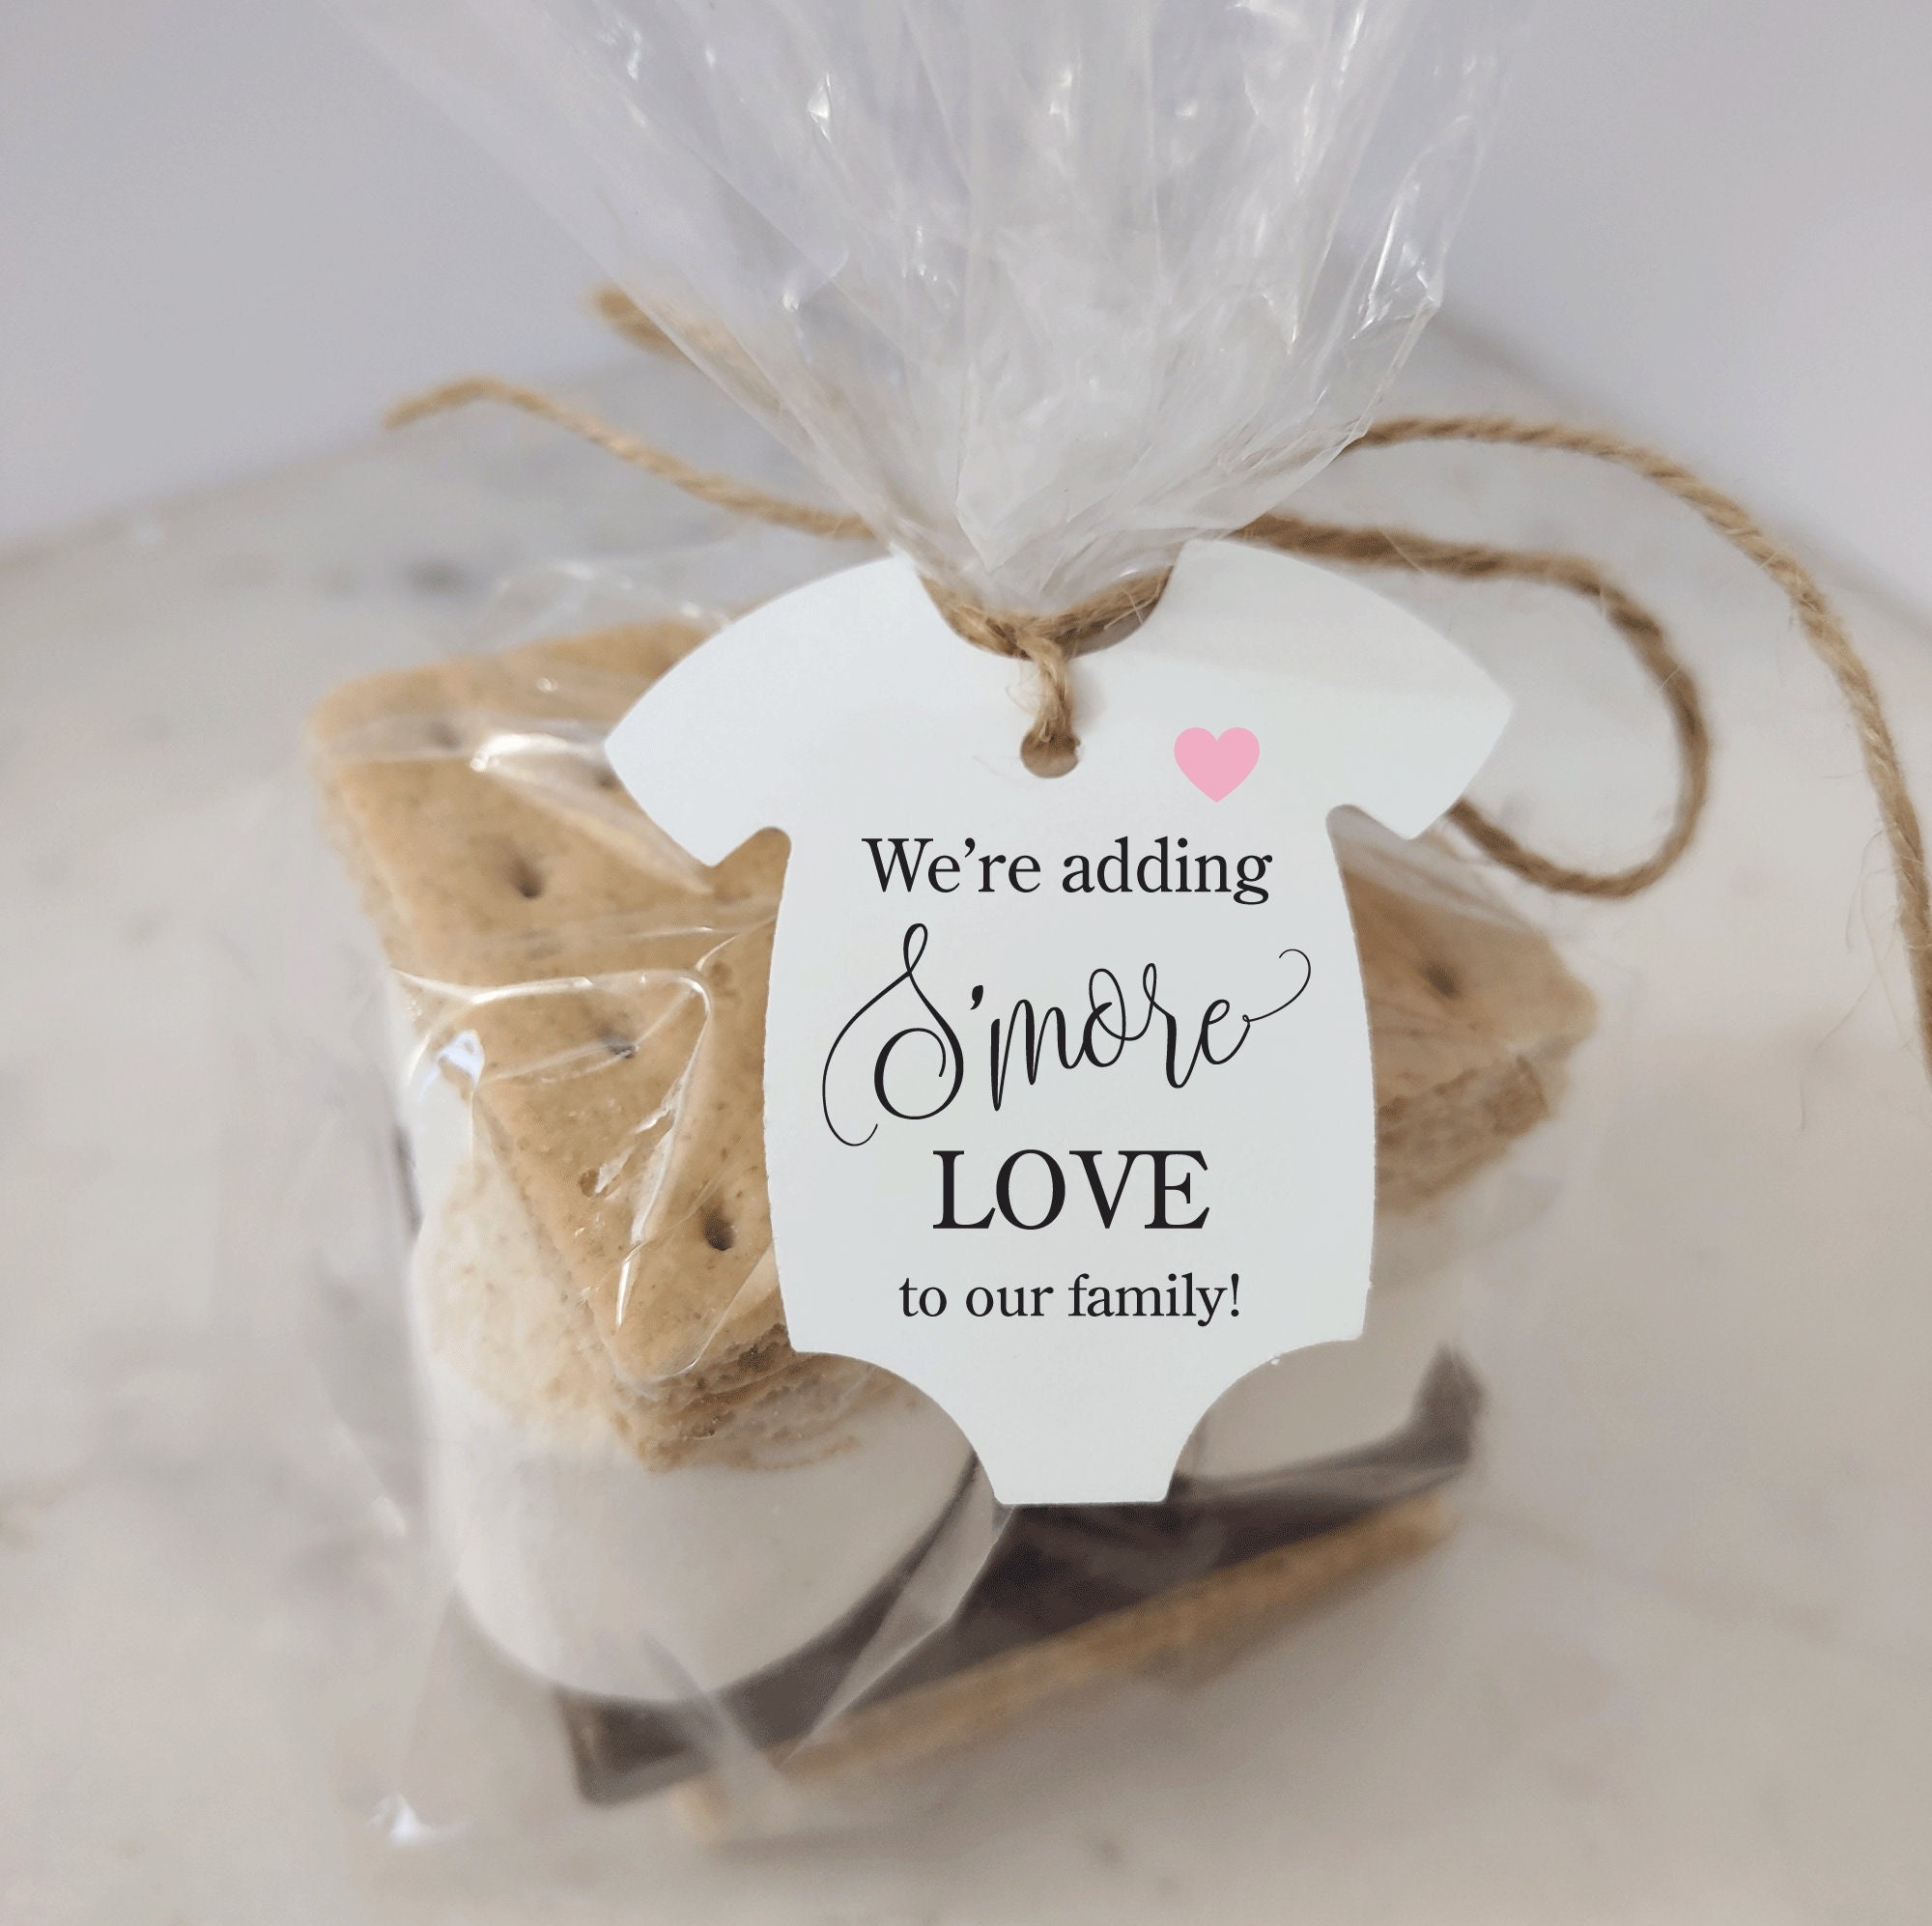 DIY smores favors  The perfect gift for your guest on a winter